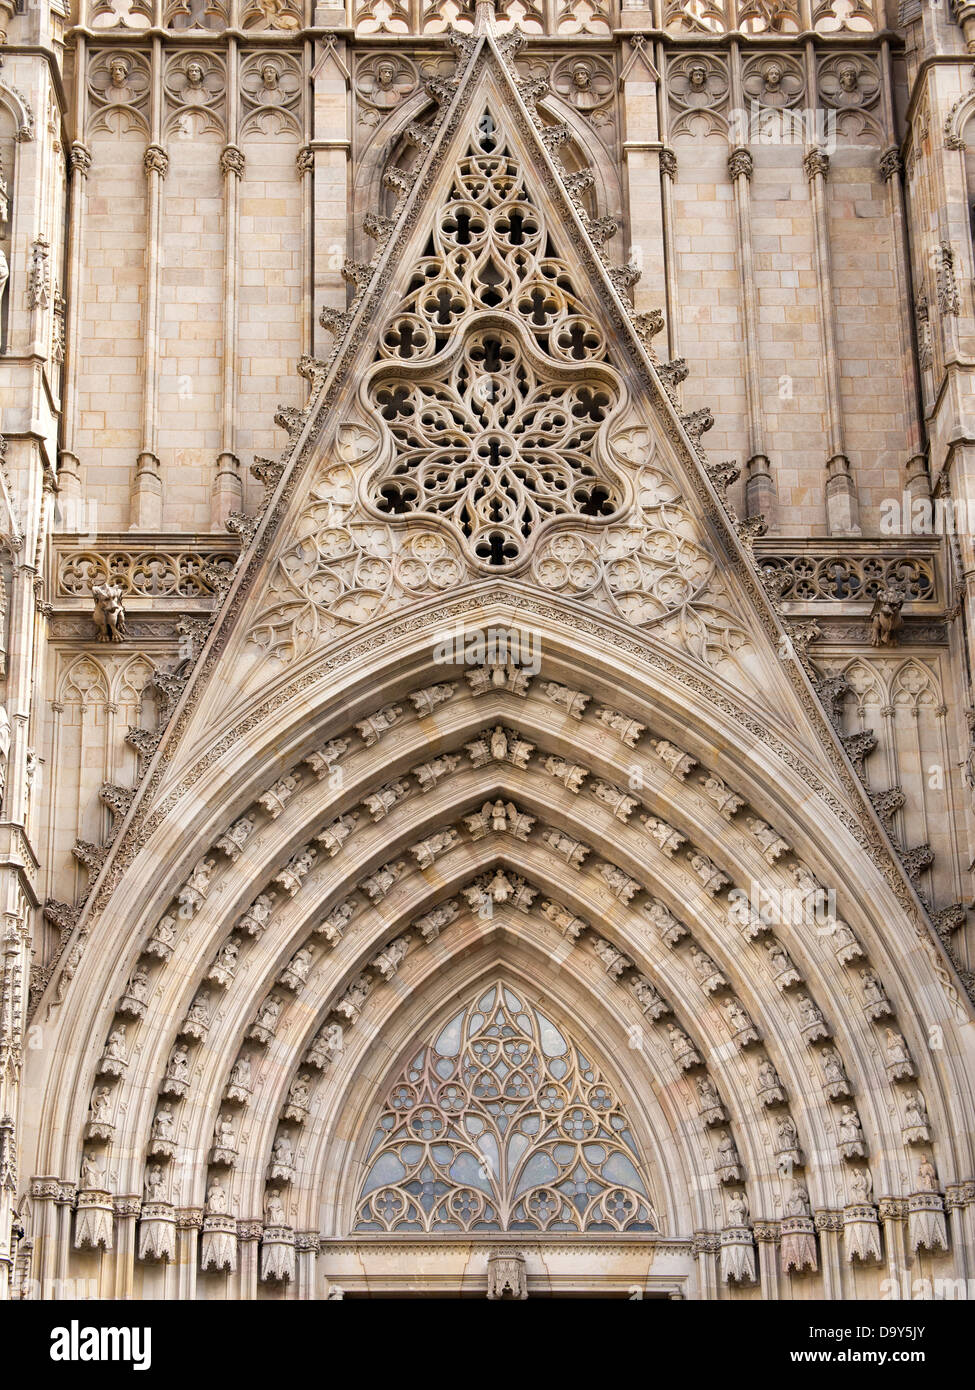 Imposing facade of the Santa Eulalia Cathedral in Barcelona's Gothic Quarter, Spain 3 Stock Photo